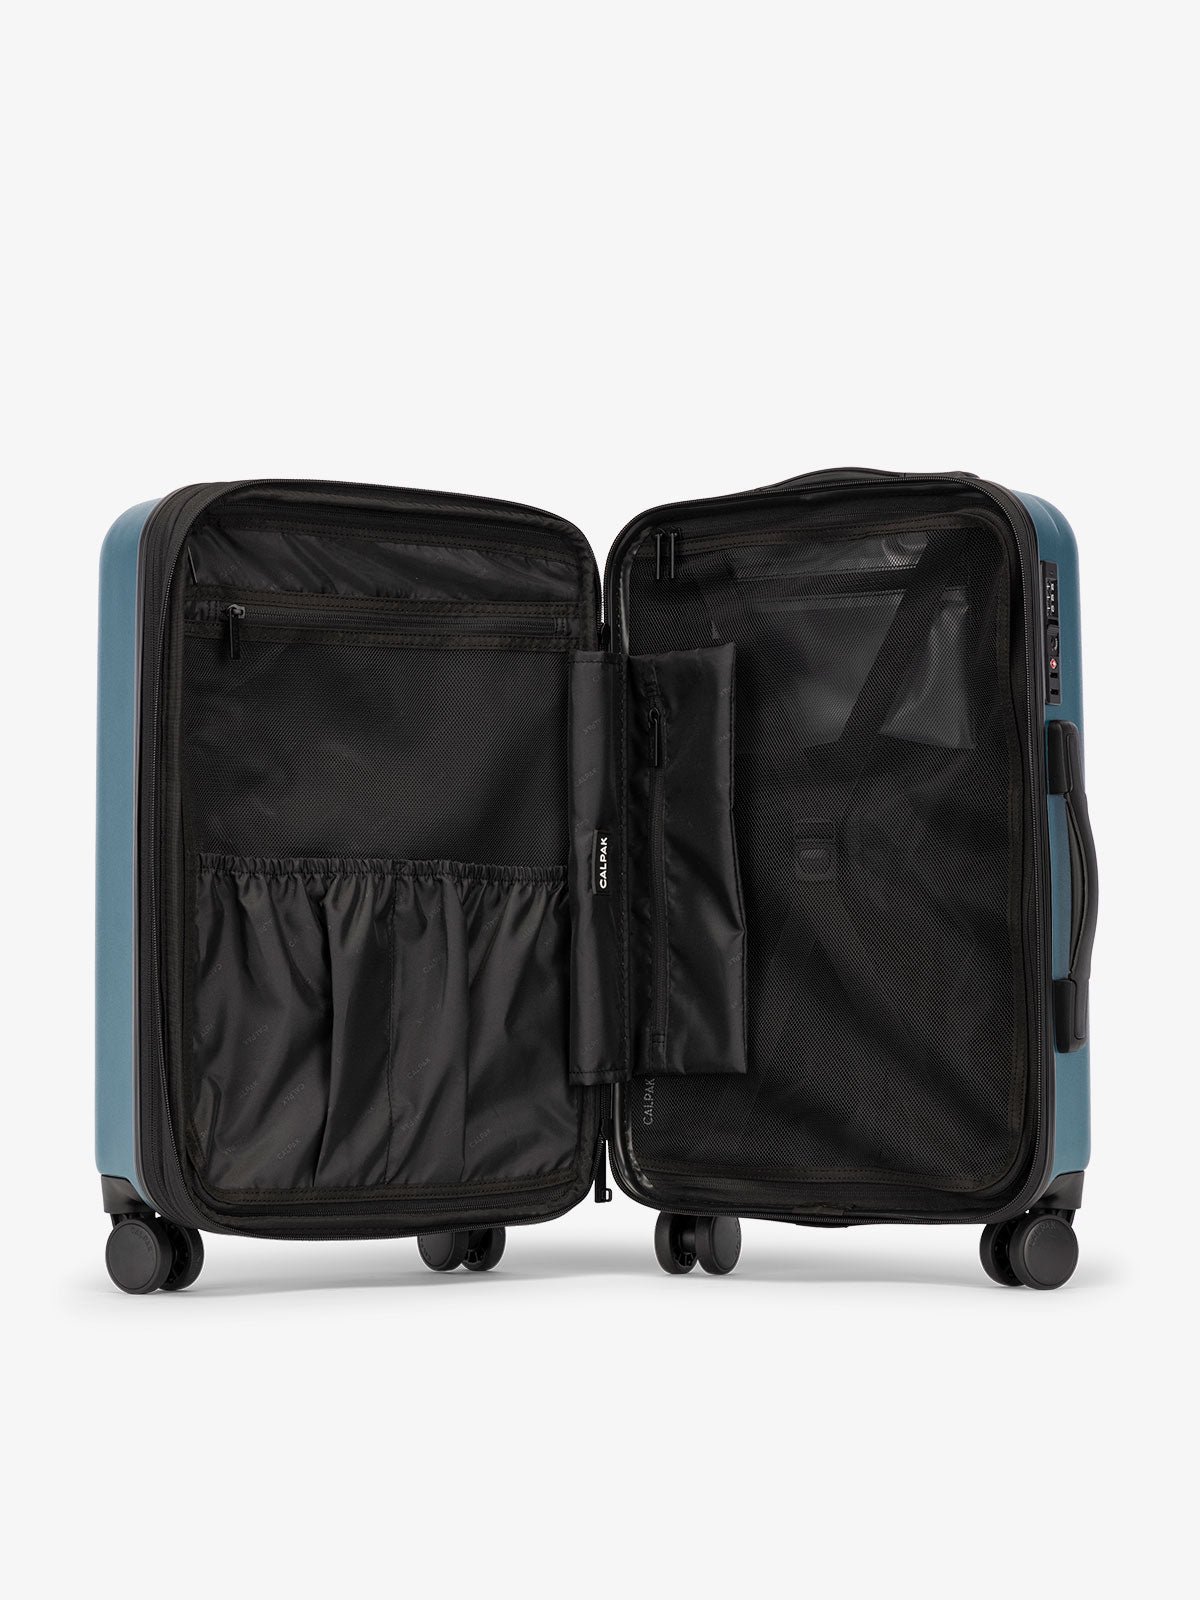 Pacific blue CALPAK Evry Carry-On Luggage features divided compartments with interior pockets for organized packing